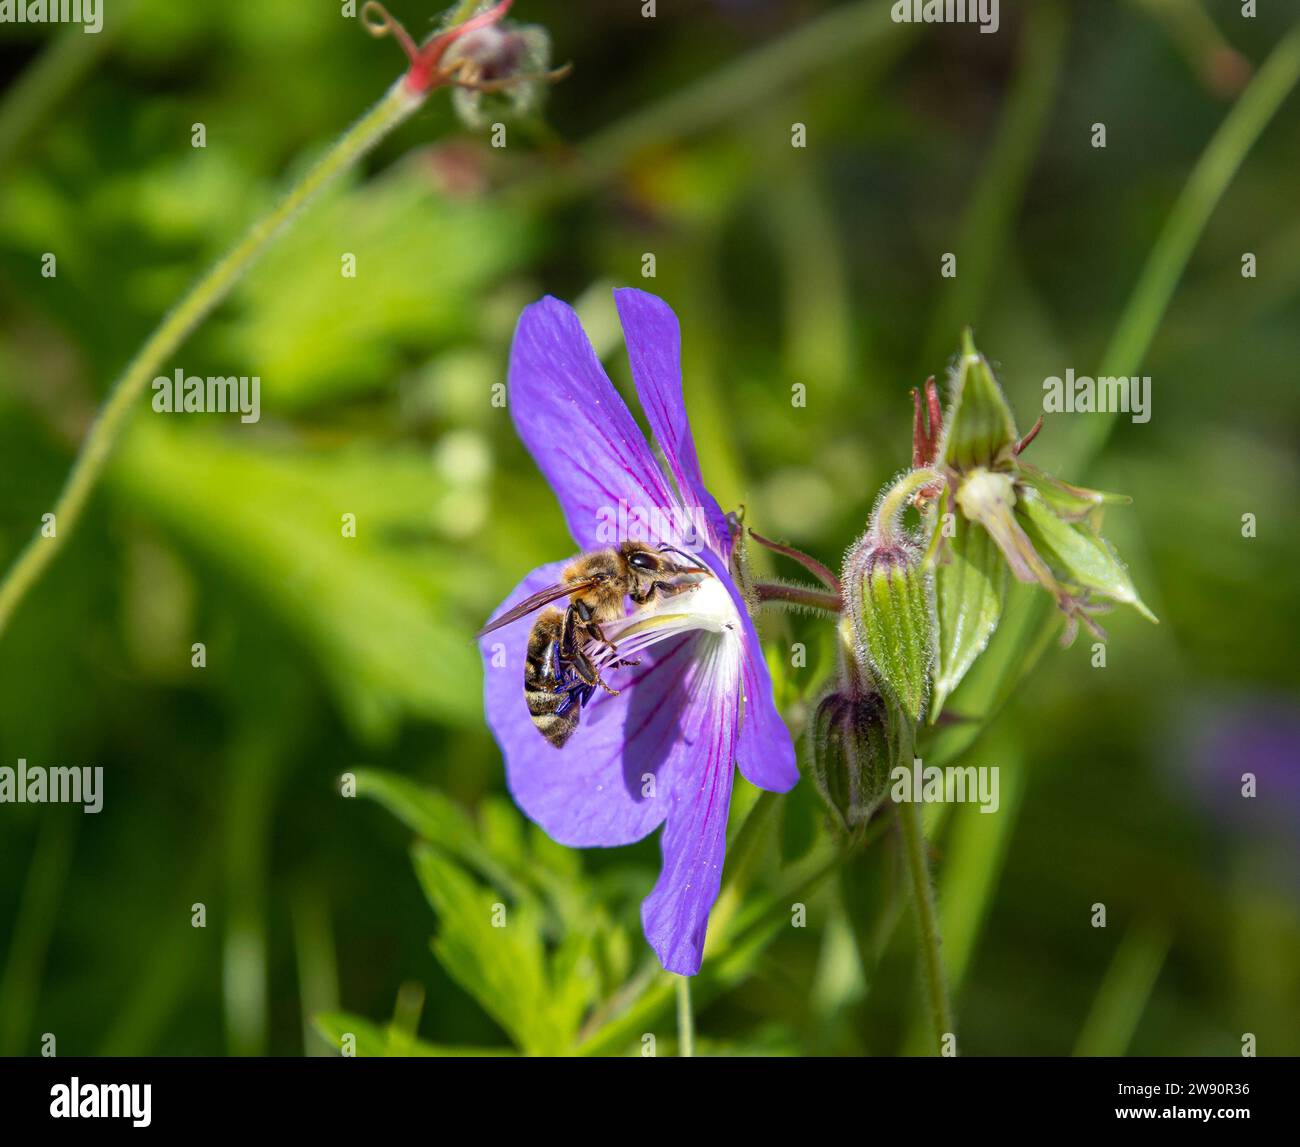 Macro of a bee on a pink hardy geranium blossom. pesticide free environmental protection concept.  Stock Photo